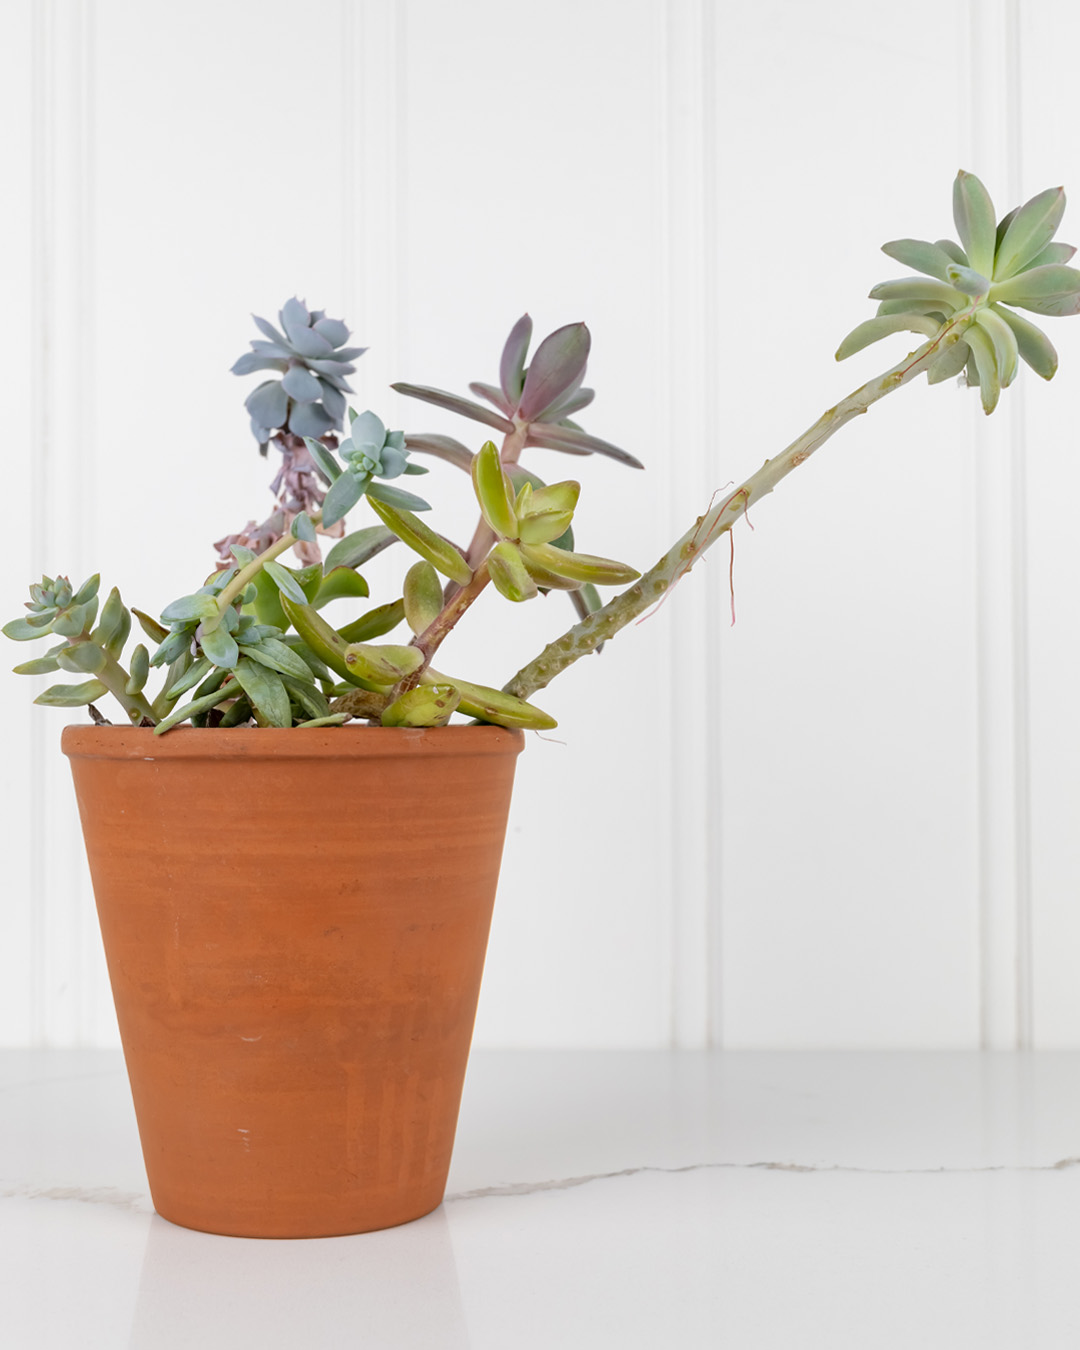 An example of a stretched succulent. We'll learn how to fixed stretched succulents like this.